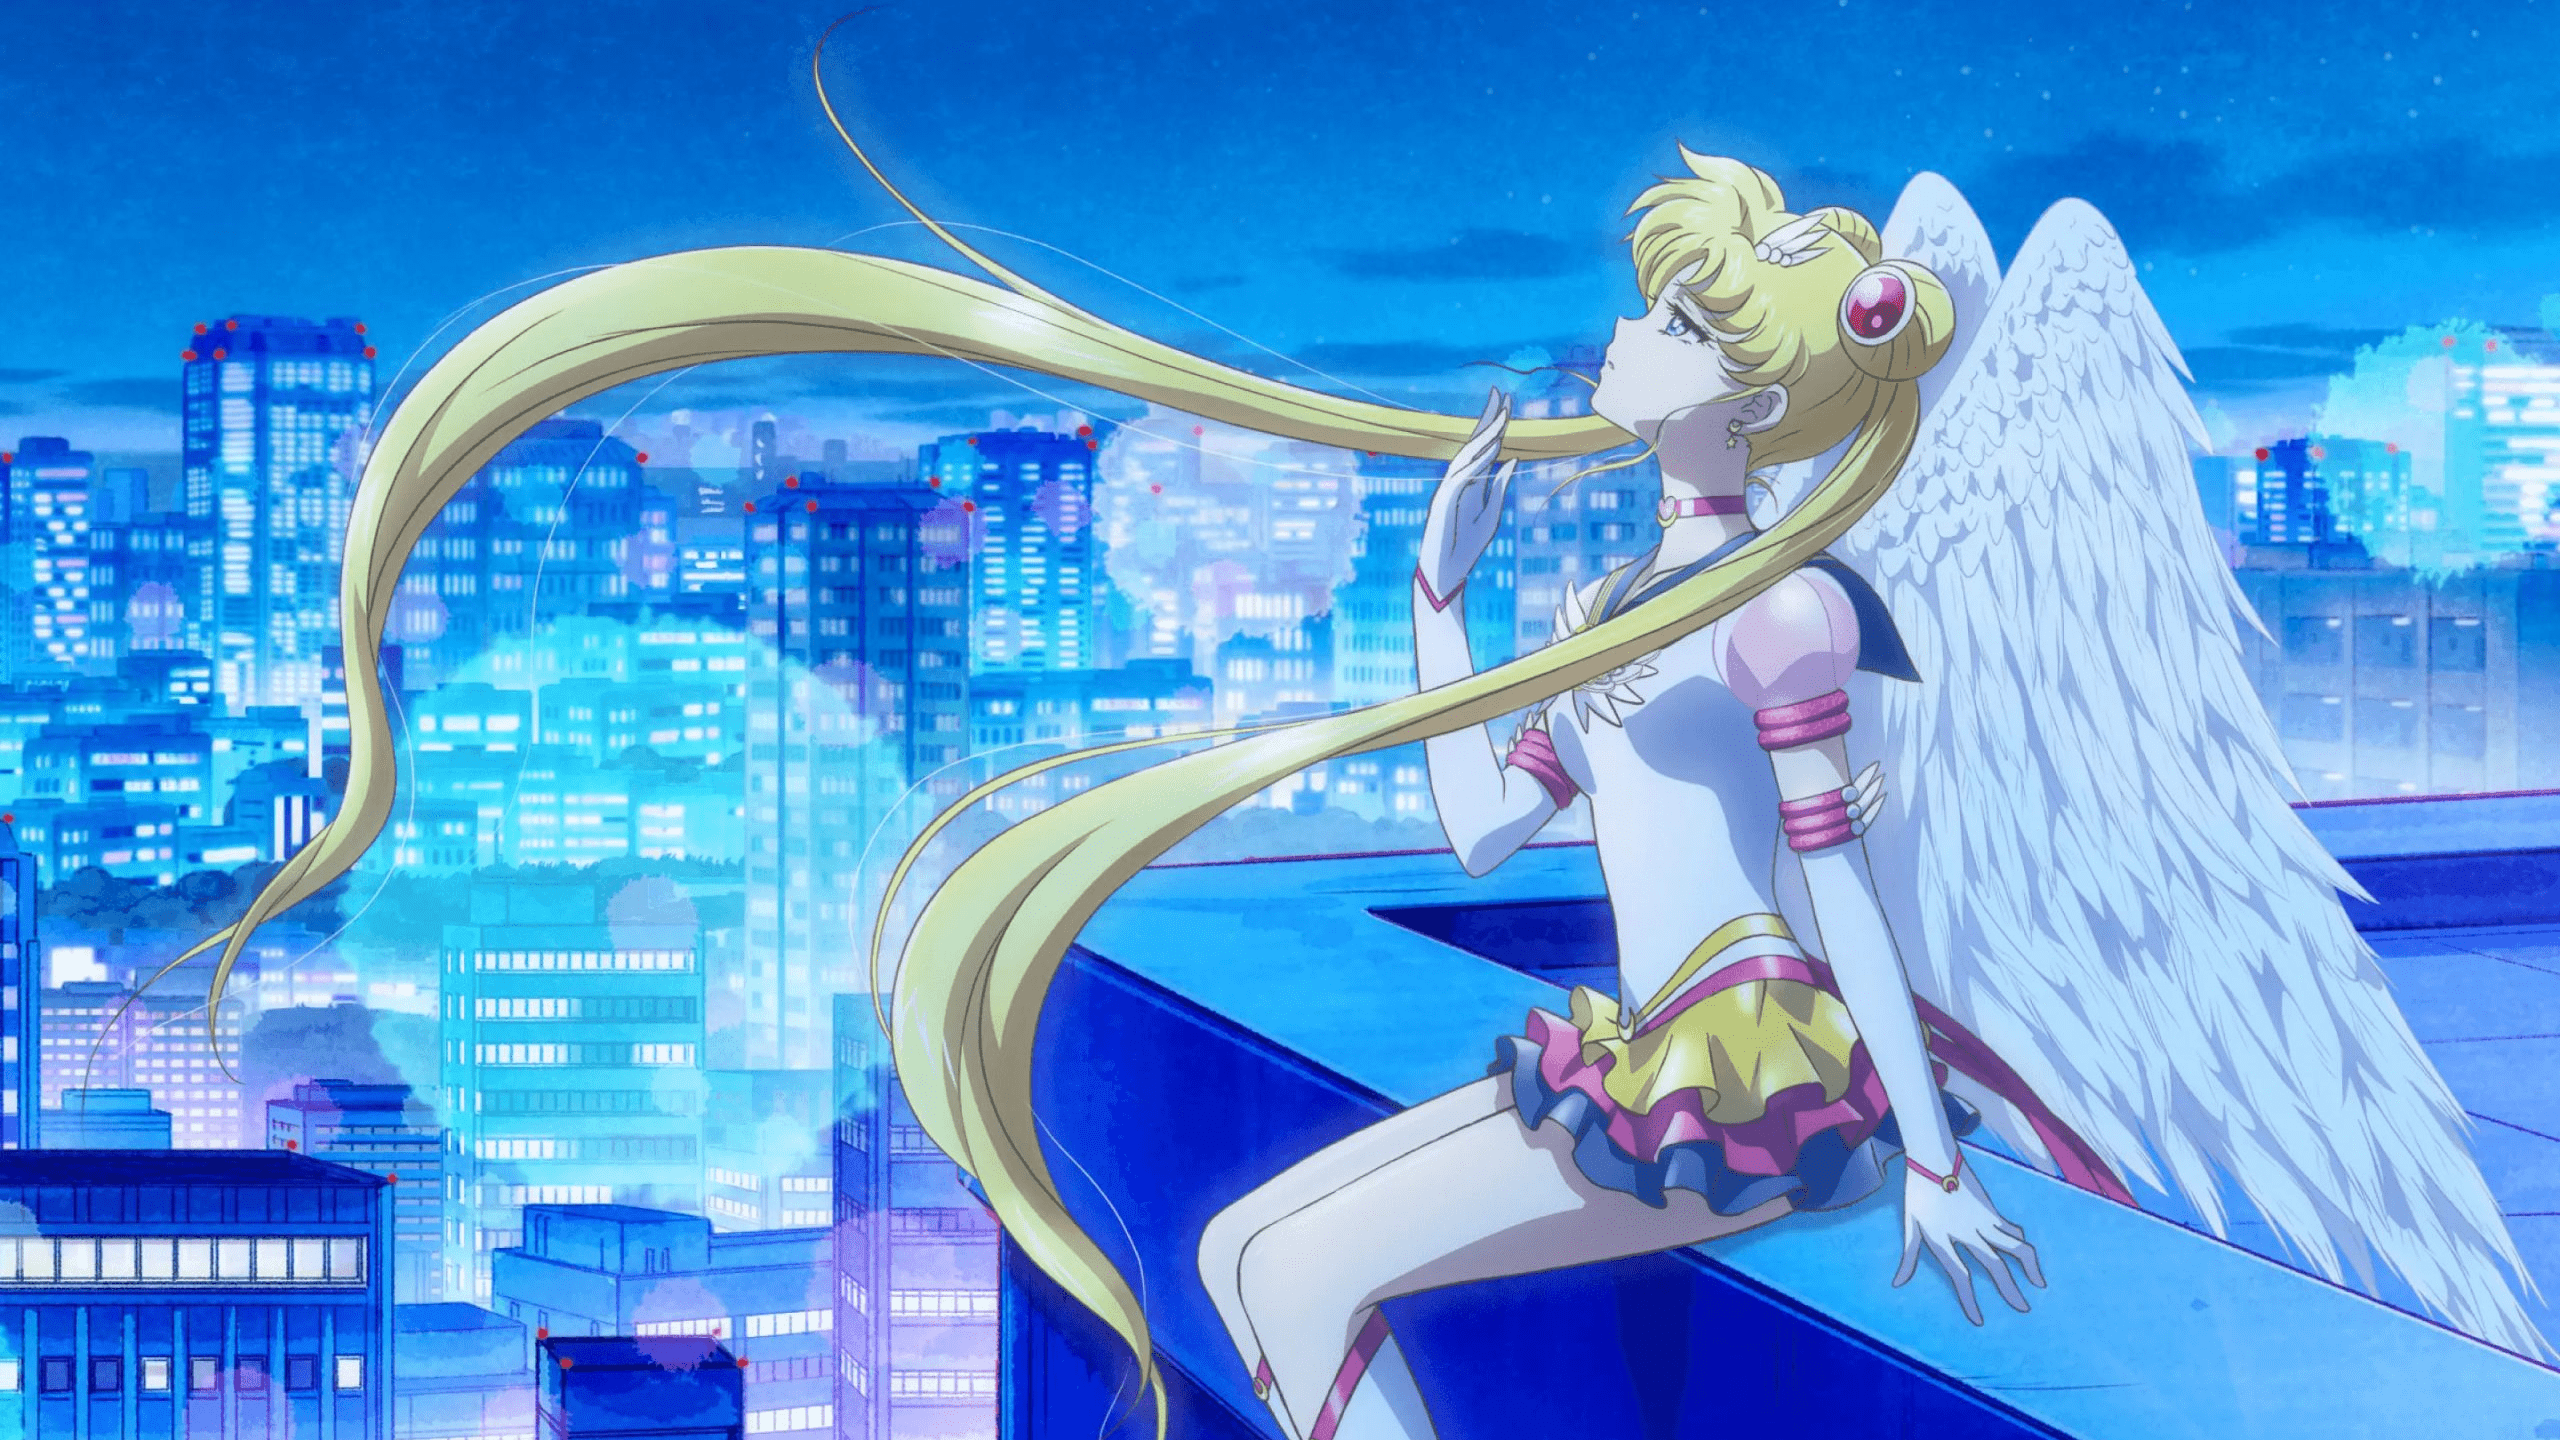 Sailor Moon Cosmos debuts in just a few days!